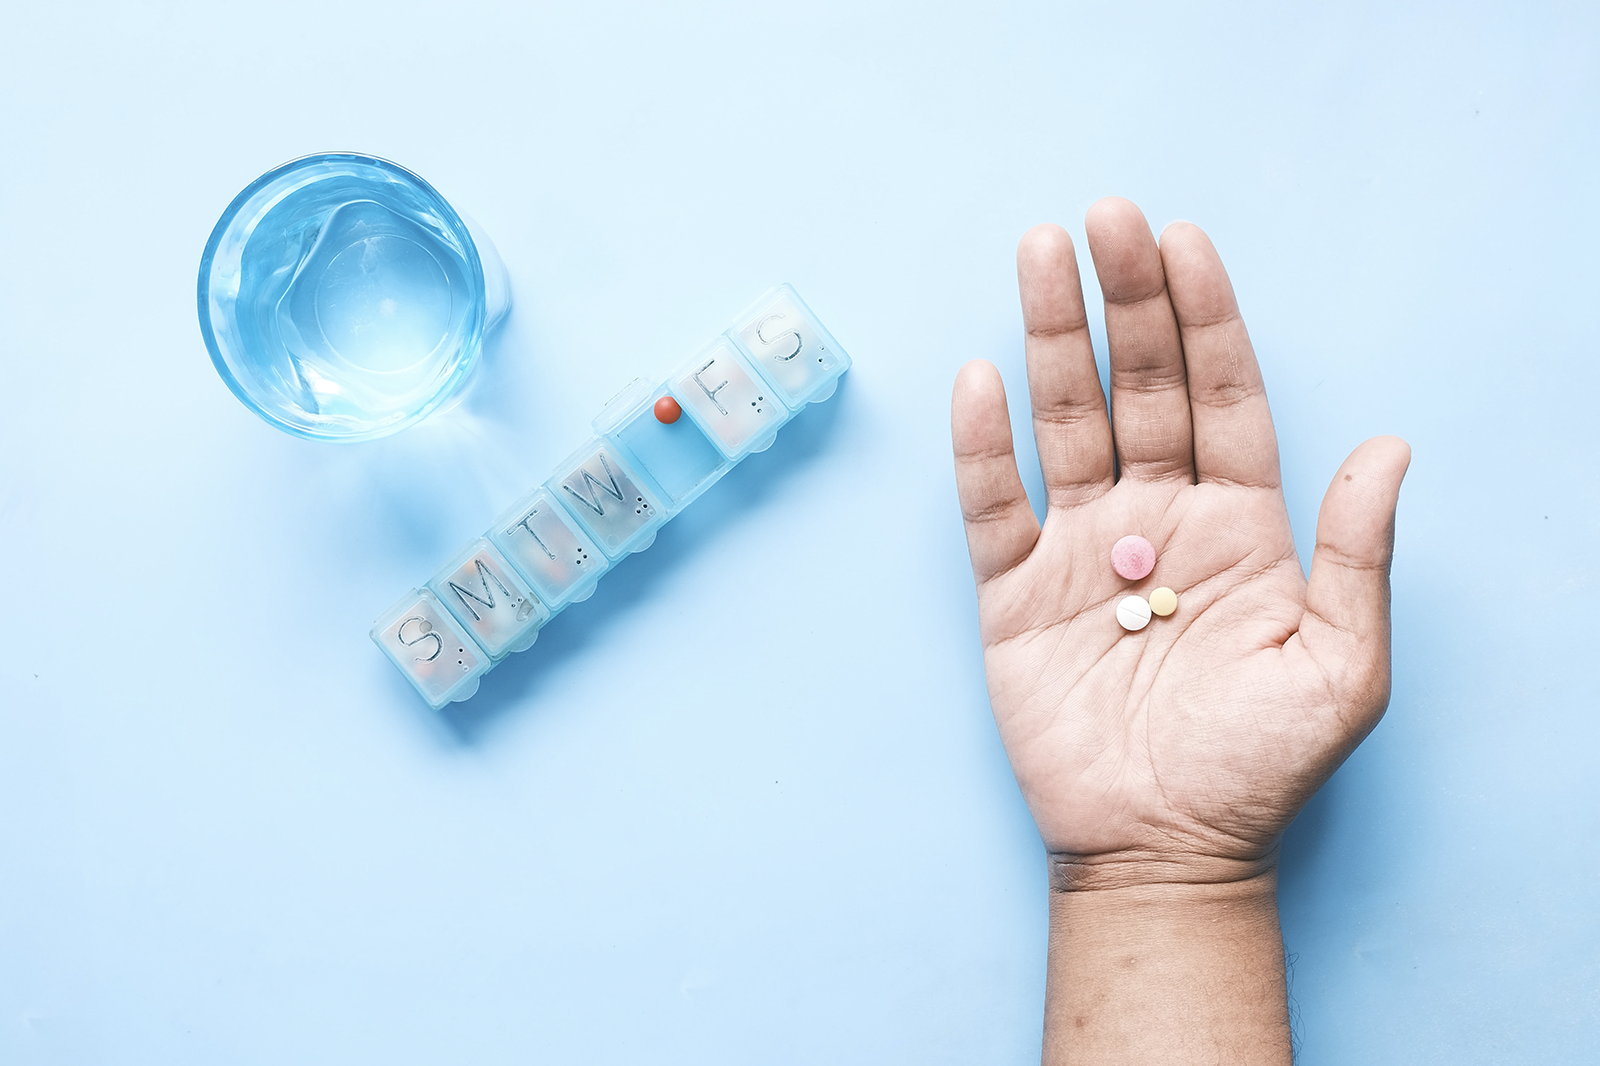 Hand holding pills next to a pill organizer and glass of water.